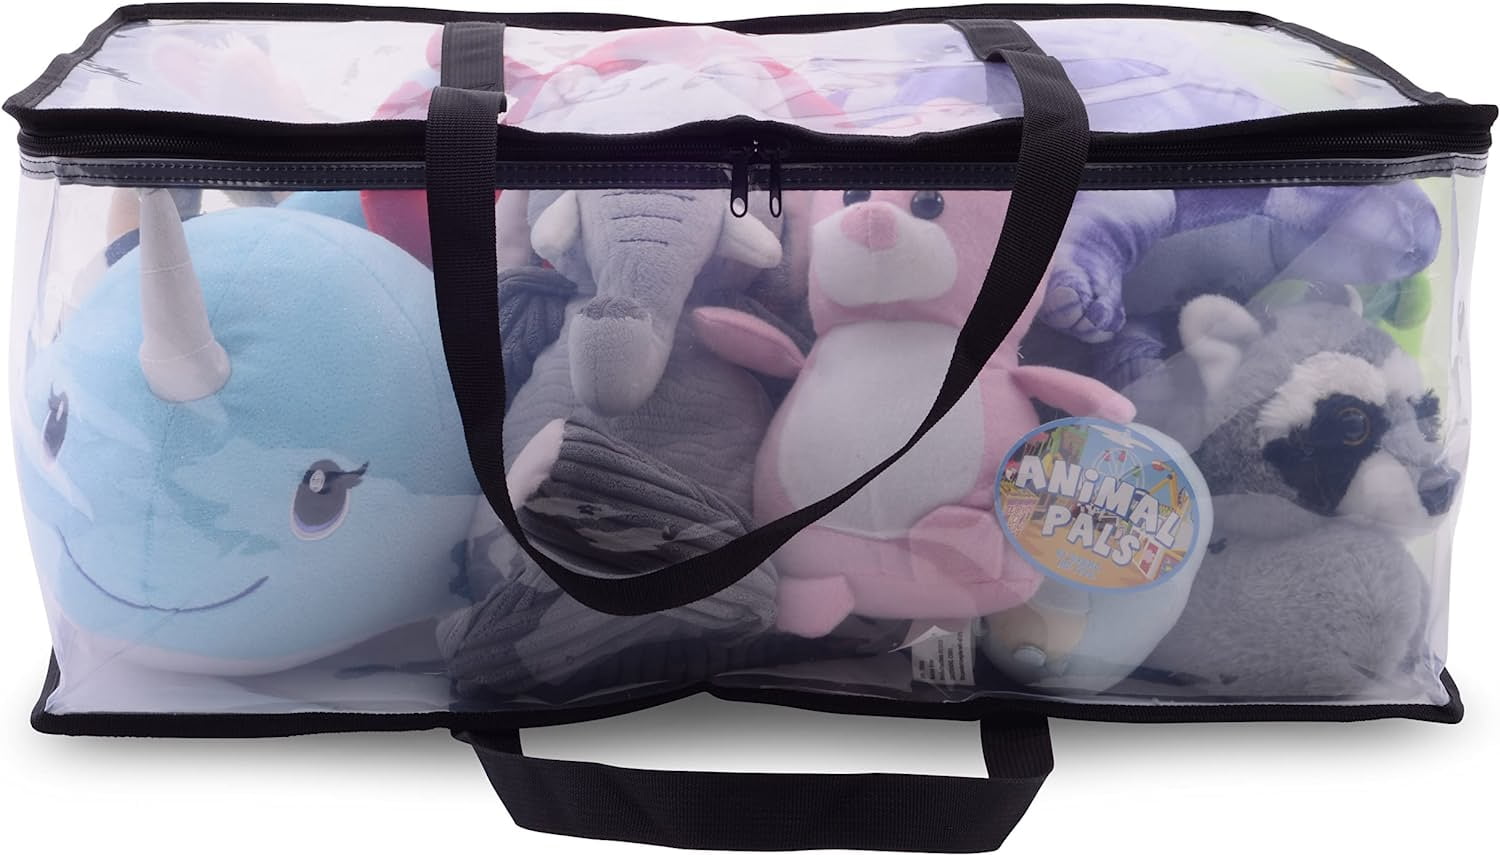  Clear Storage Bags - 3 Pack Zippered Moving Bags, See Thru  Transparent Heavy Duty Totes with Handles, Large & Waterproof for Clothes,  Blankets, Linens, Packing, Organizing, Under Bed - 27x12x13.75 